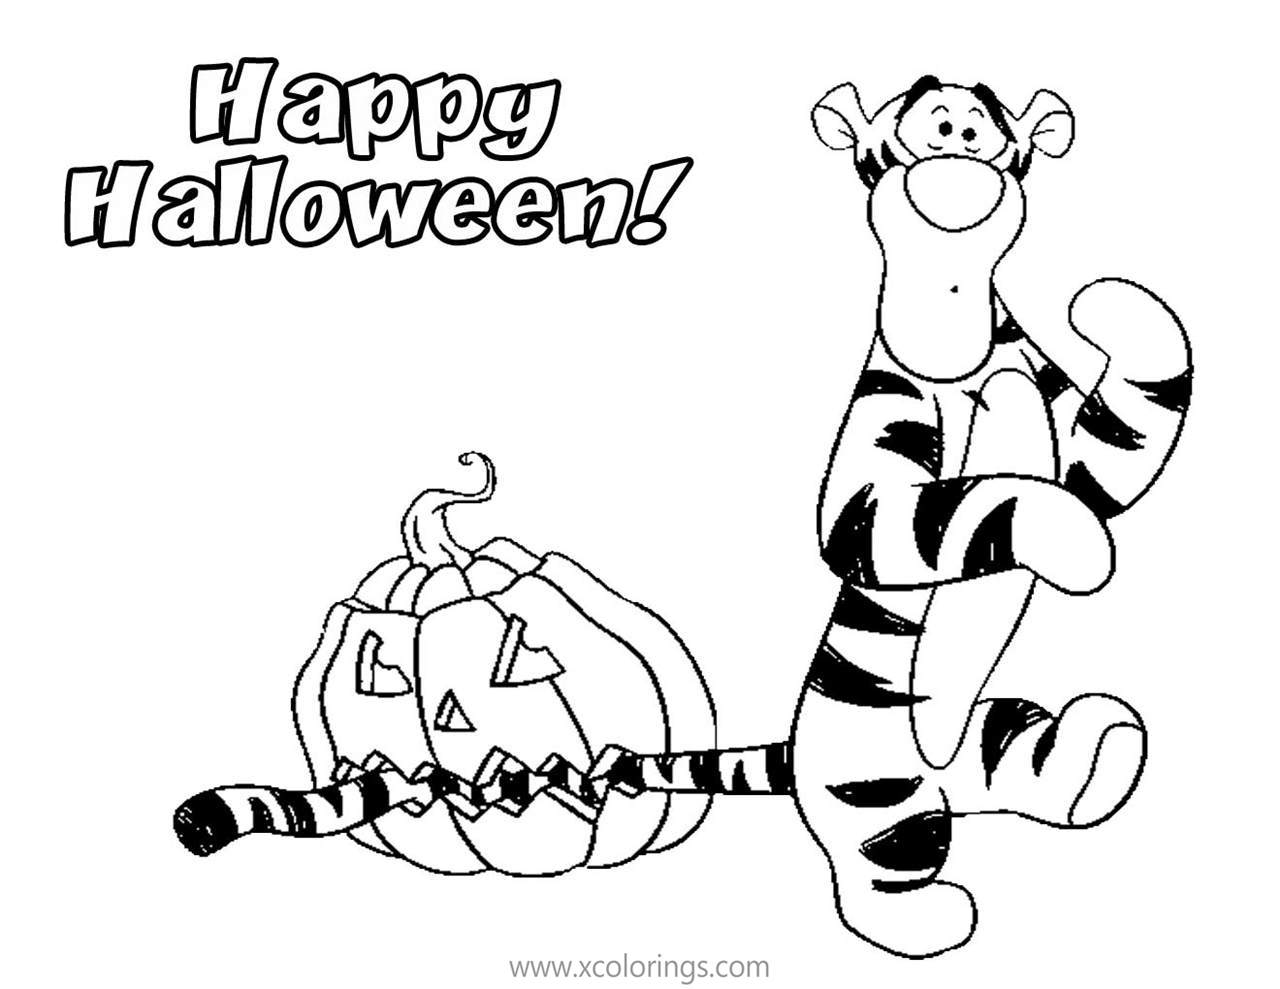 Free Winnie the Pooh Halloween Tigger Coloring Pages printable